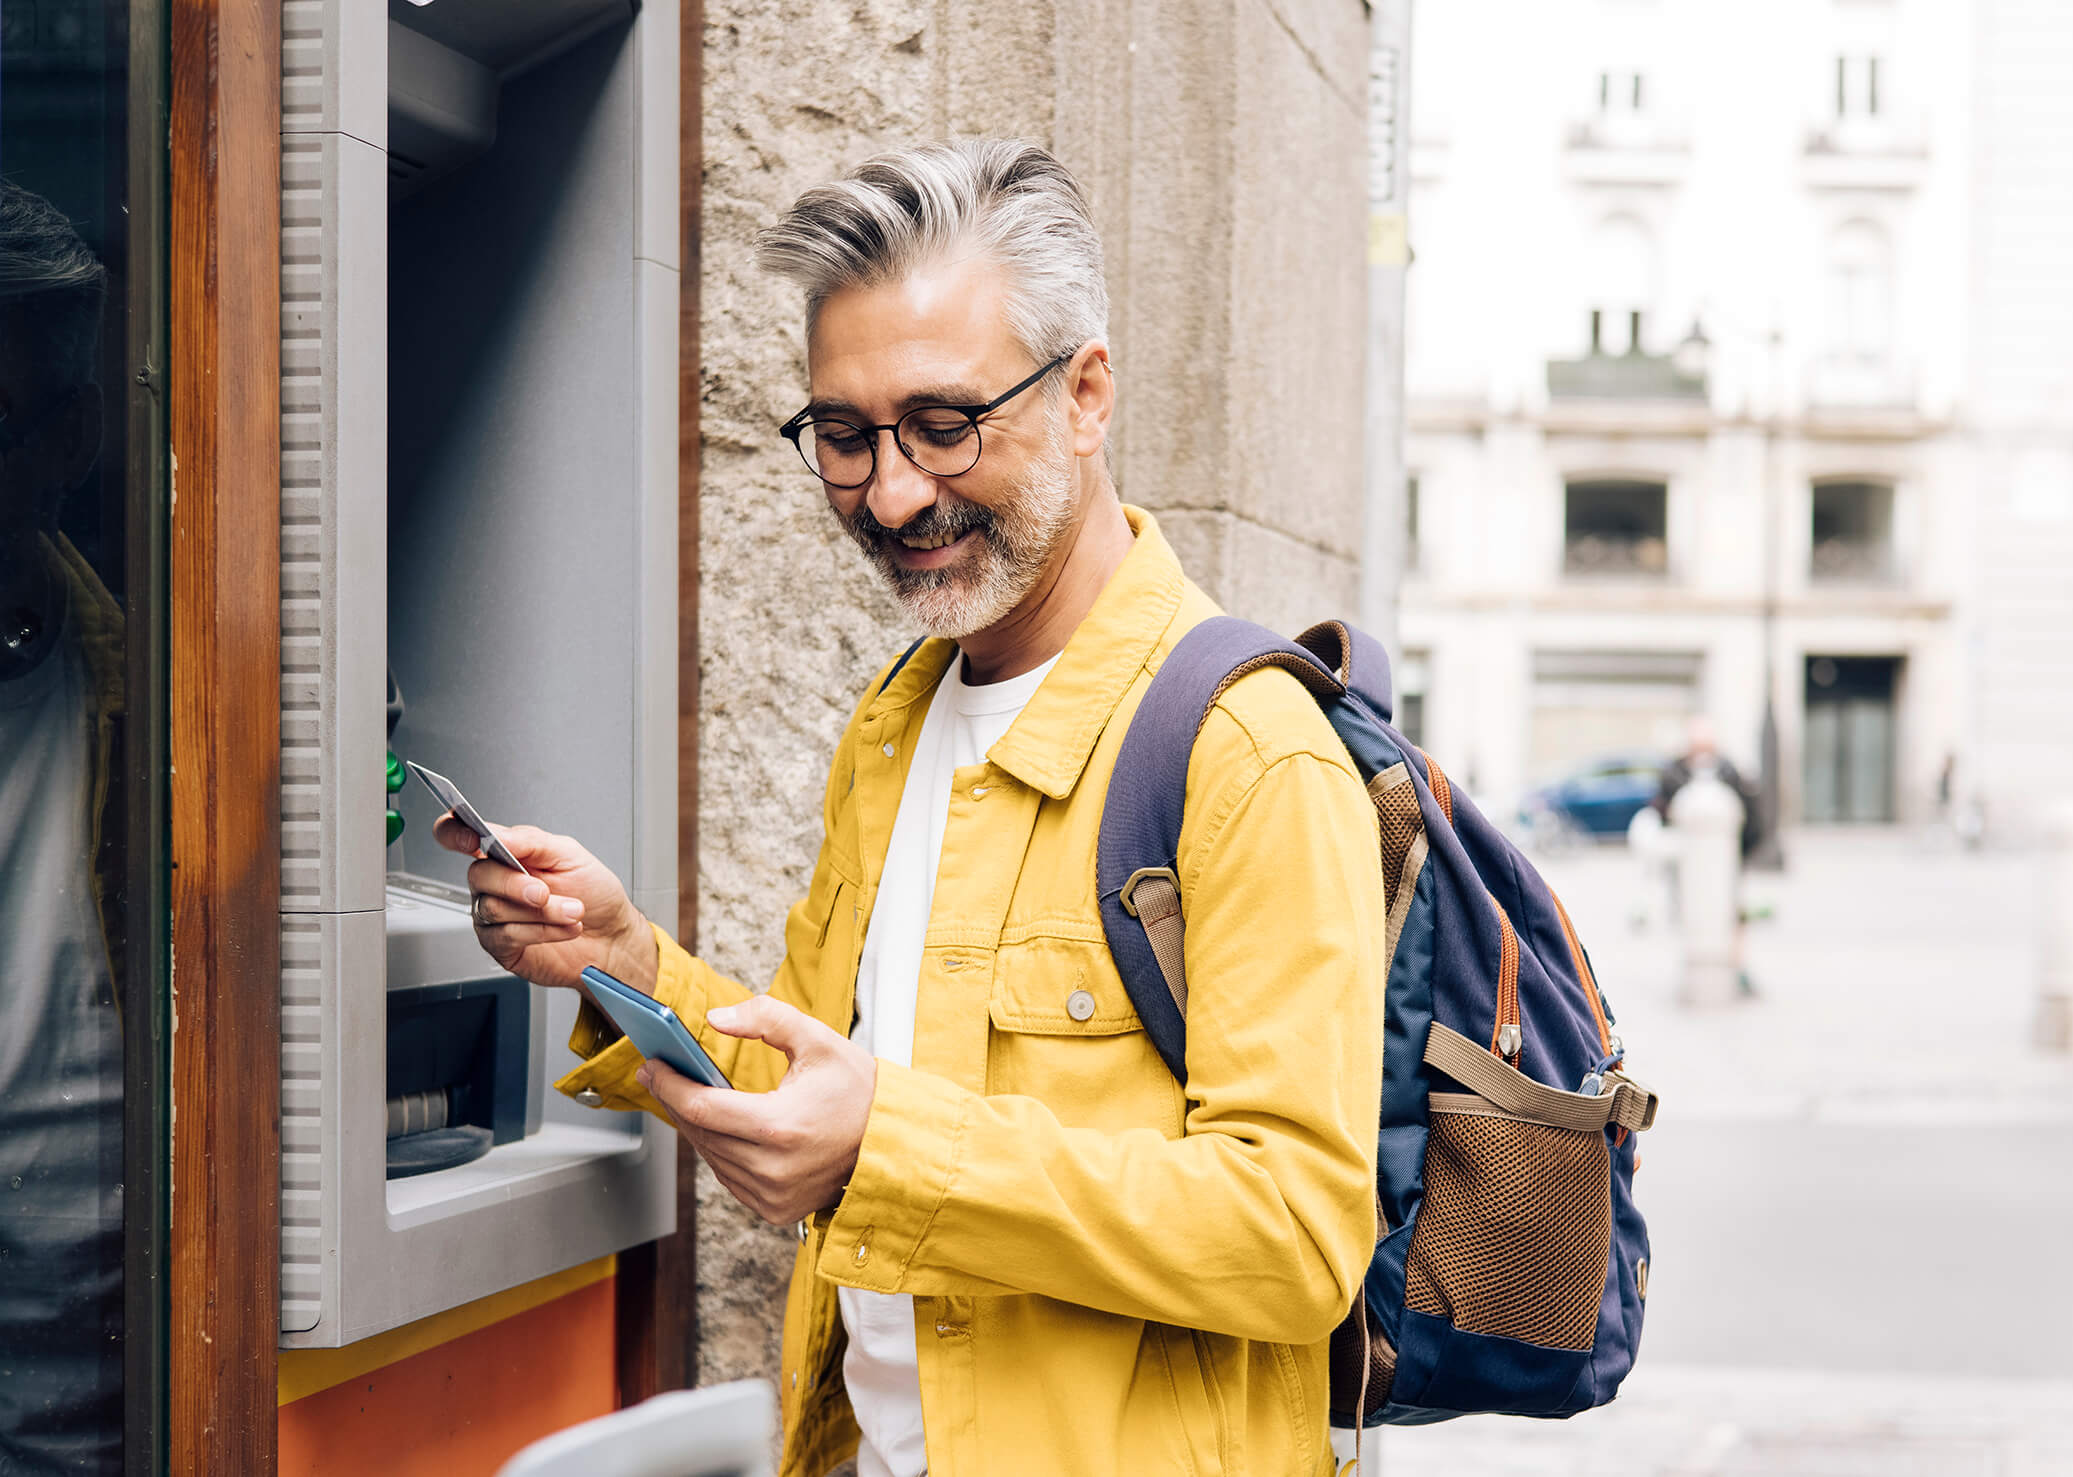 Man in a yellow jacket using an atm